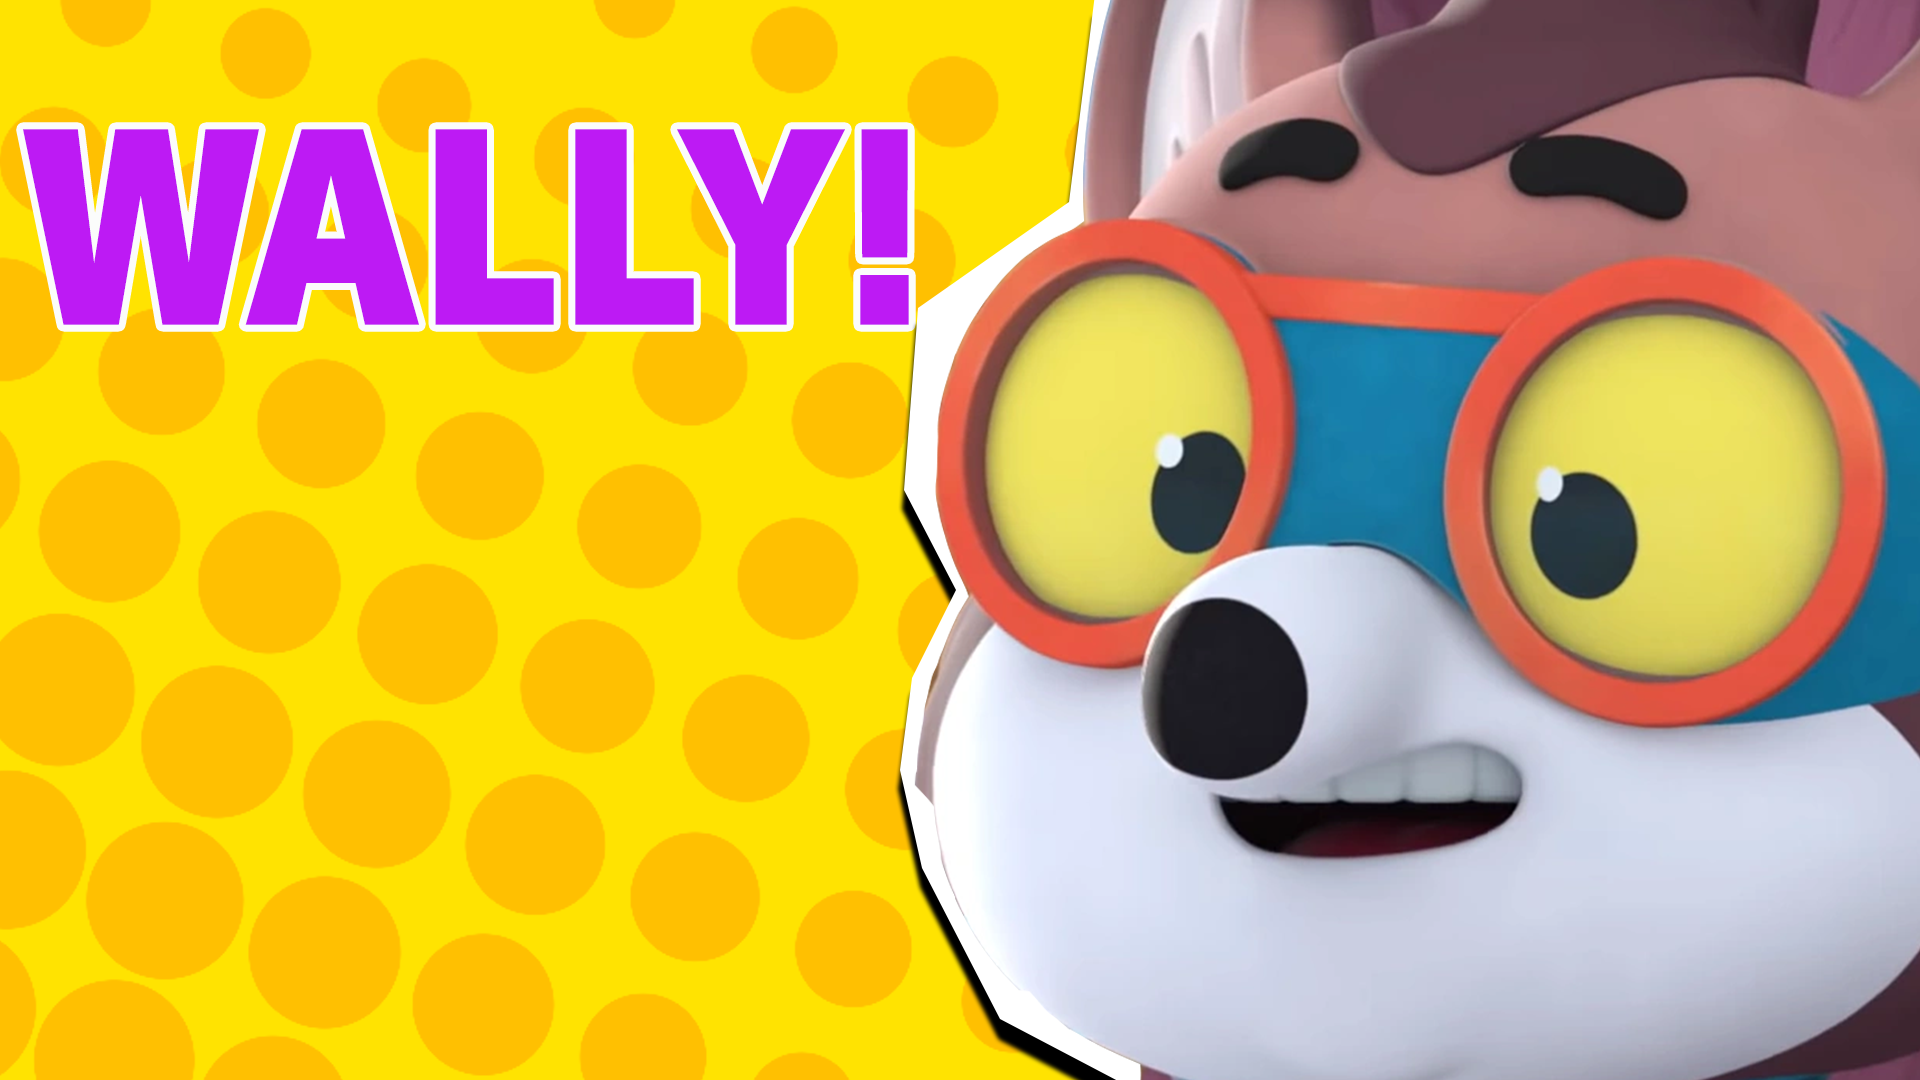 You're most like Wally! You're bursting with energy and always ready for anything! You love exploring new things and being in the thick of the action!